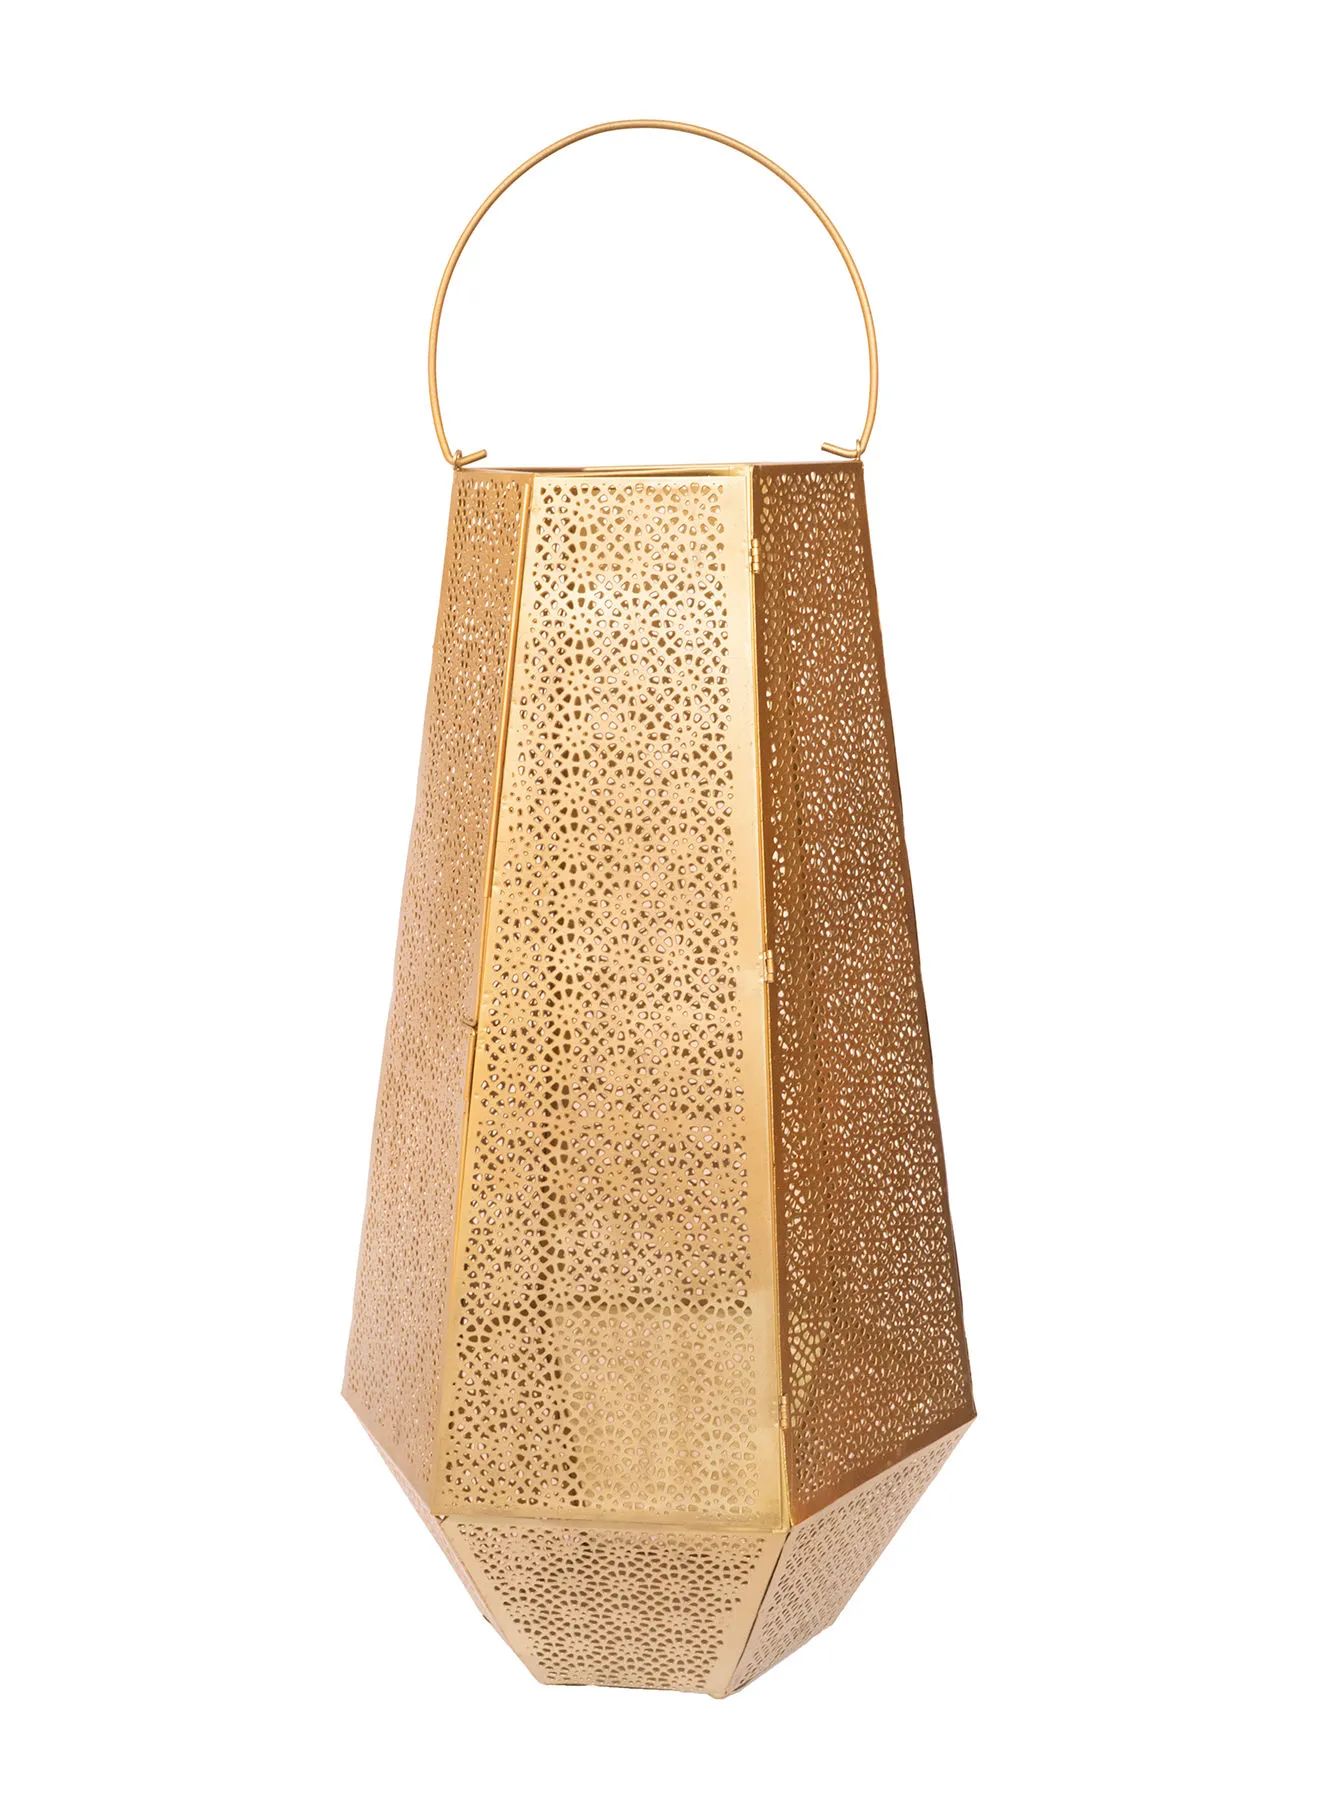 ebb & flow Handmade Ramadan Candle Holder Lantern Unique Luxury Quality Scents For The Perfect Stylish Home Gold 30.48 x 30.48 x 54centimeter